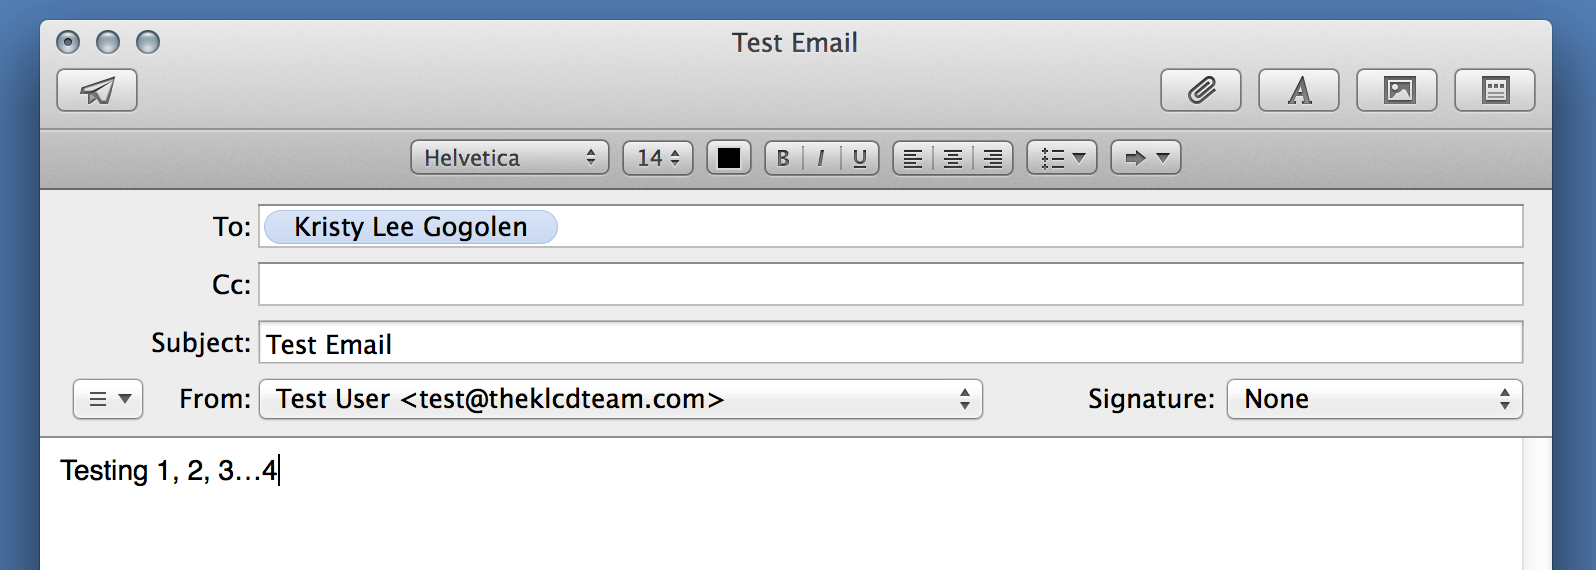 Test emails